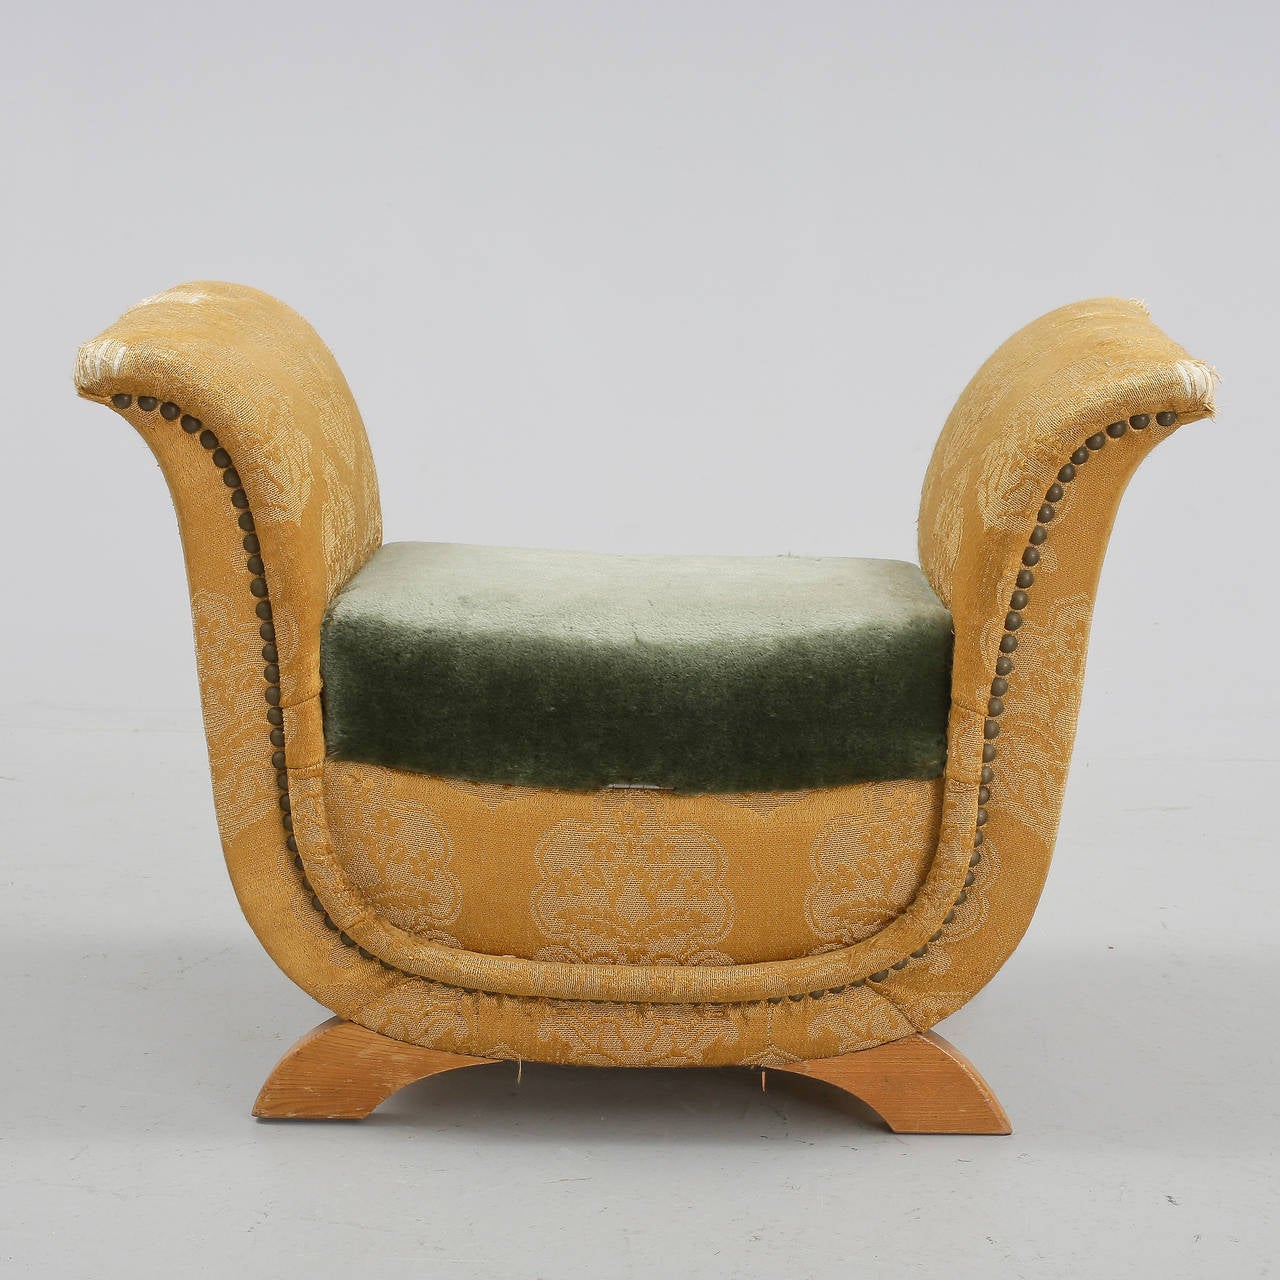 A bench or foot stool with storage designed by Otto Schulz, Sweden, circa 1940.